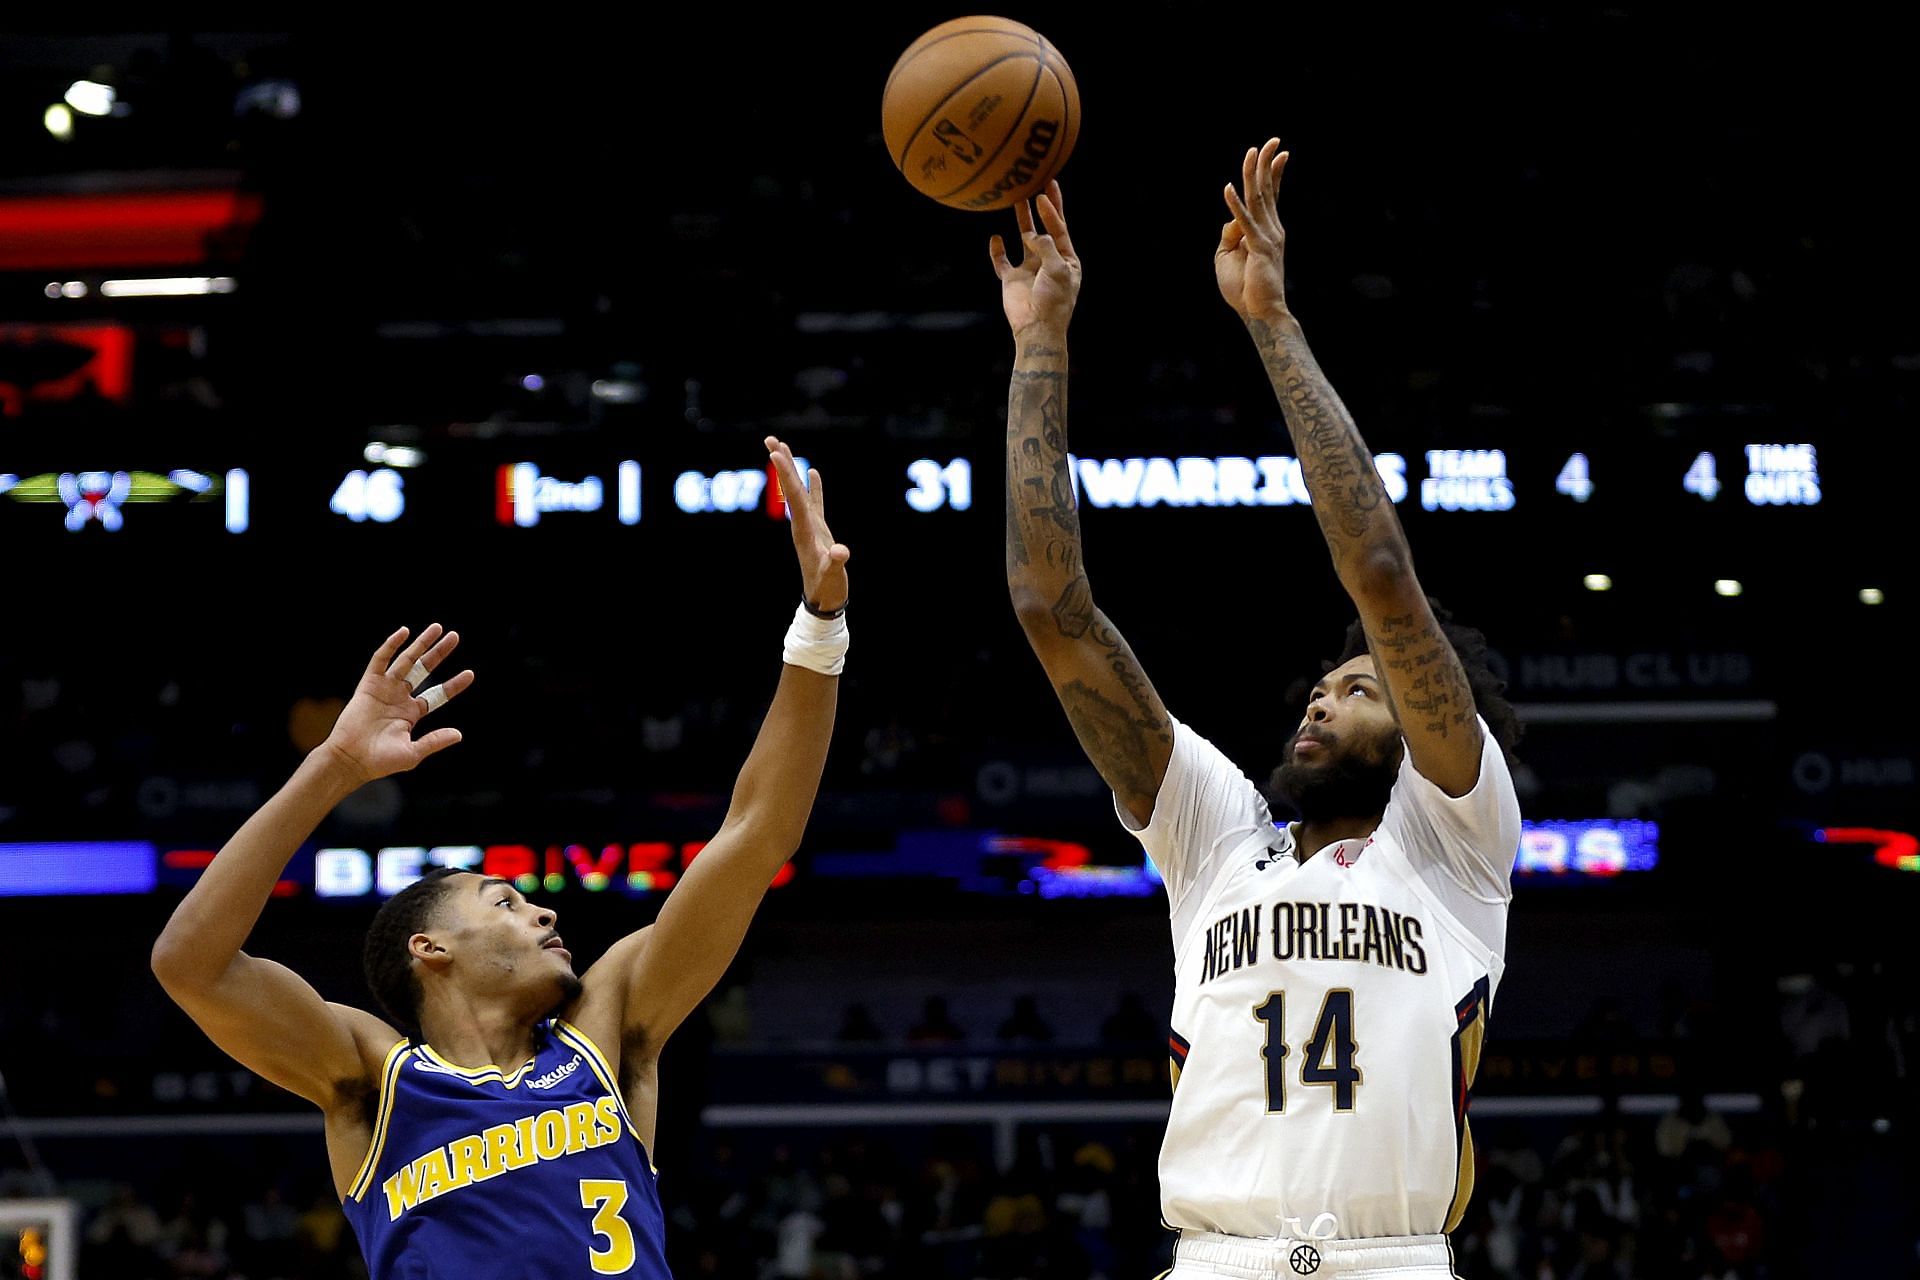 Ingram led the Pelicans to a 45-point win over the Warriors.